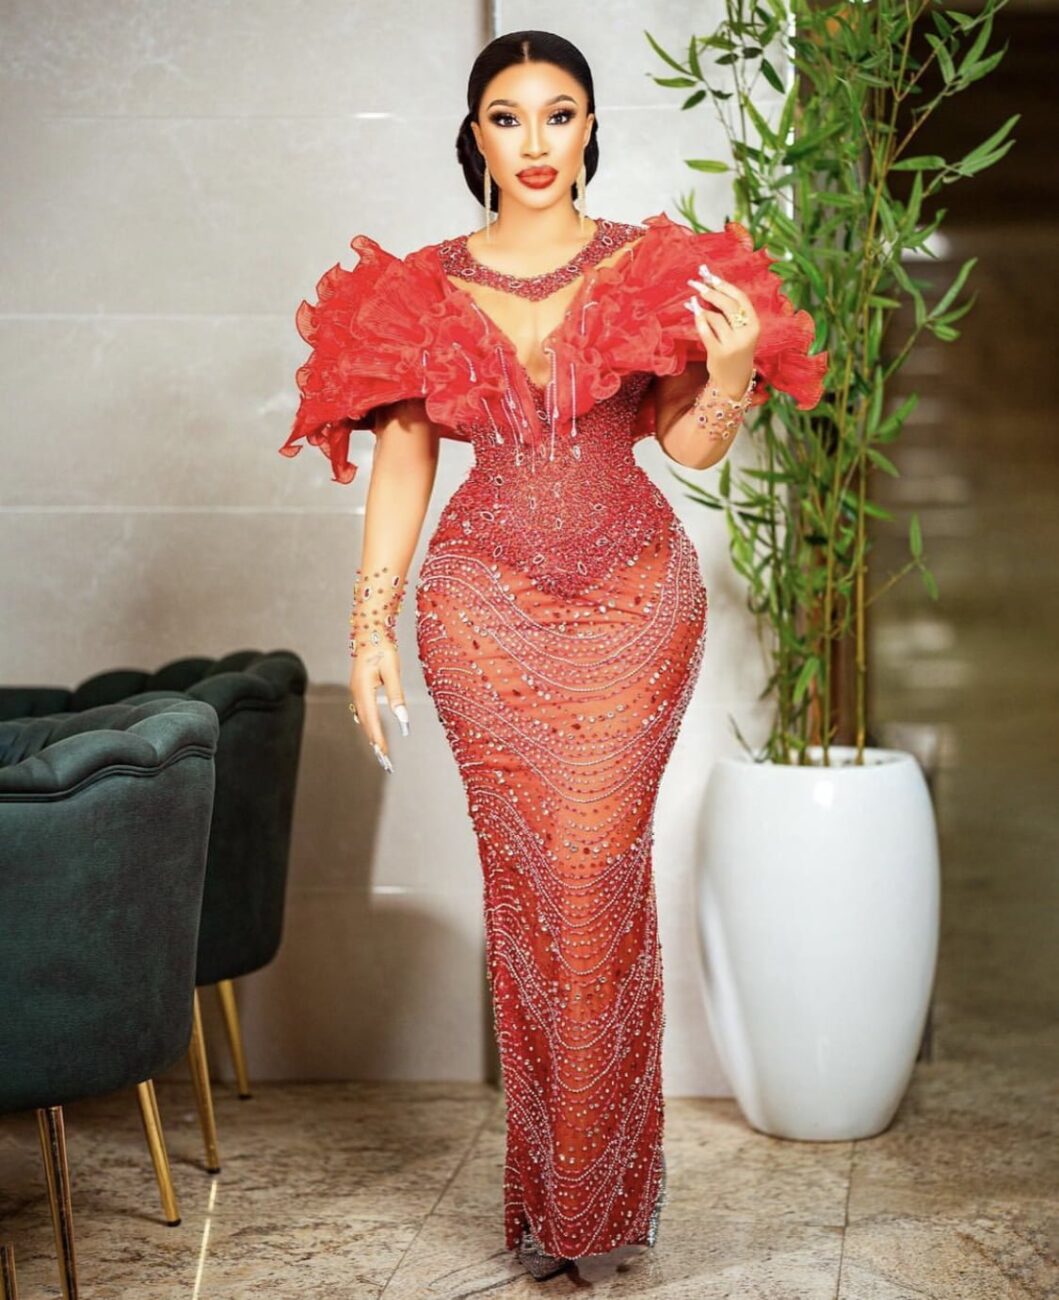 Tonto Dikeh in a dazzling red dress.